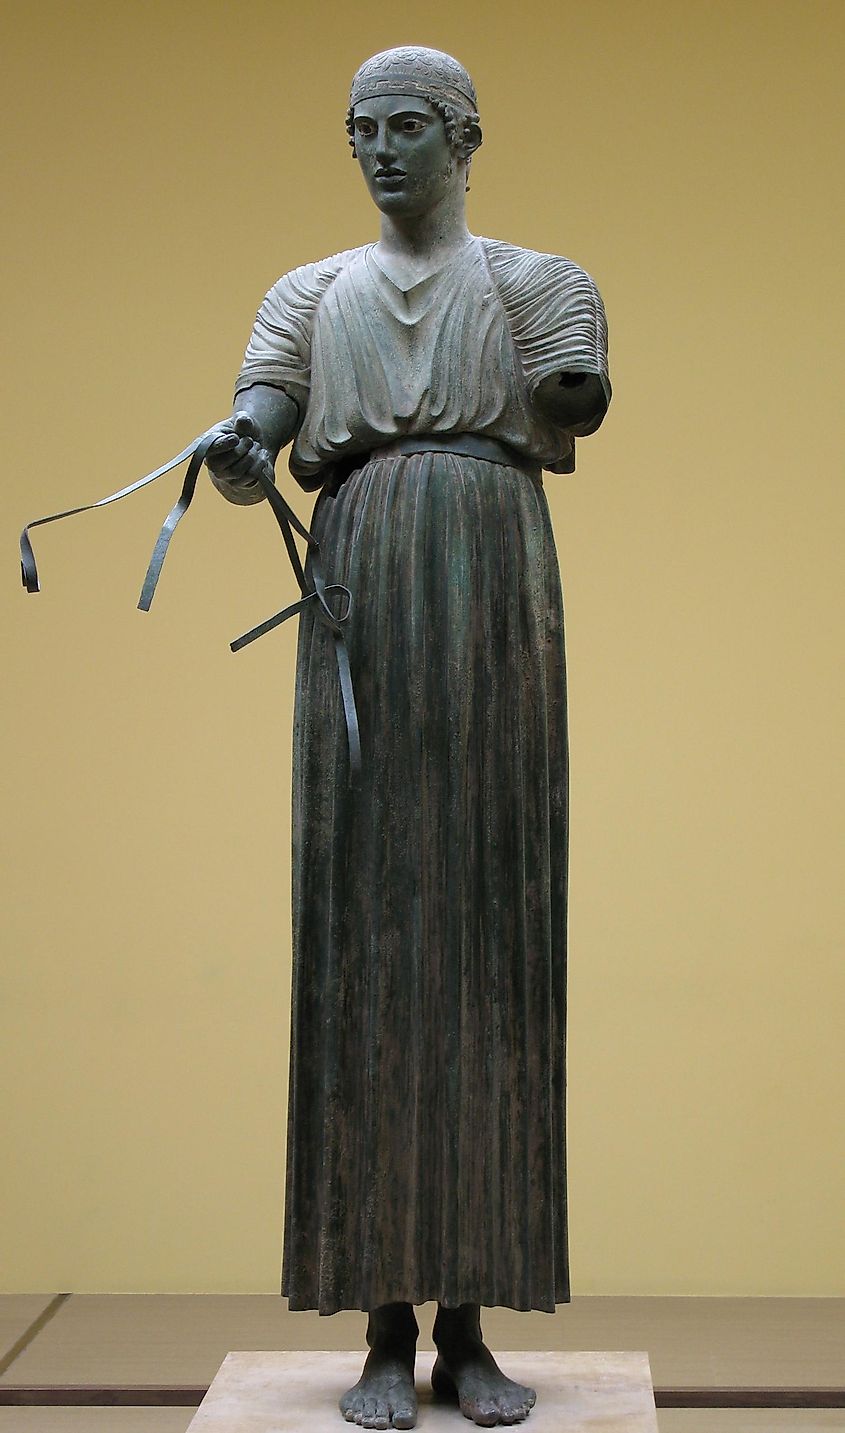 The famous Charioteer belonged to a bronze statuary complex of a chariot run by four horses and included a second male figure, via the Archaeological Museum of Delphi